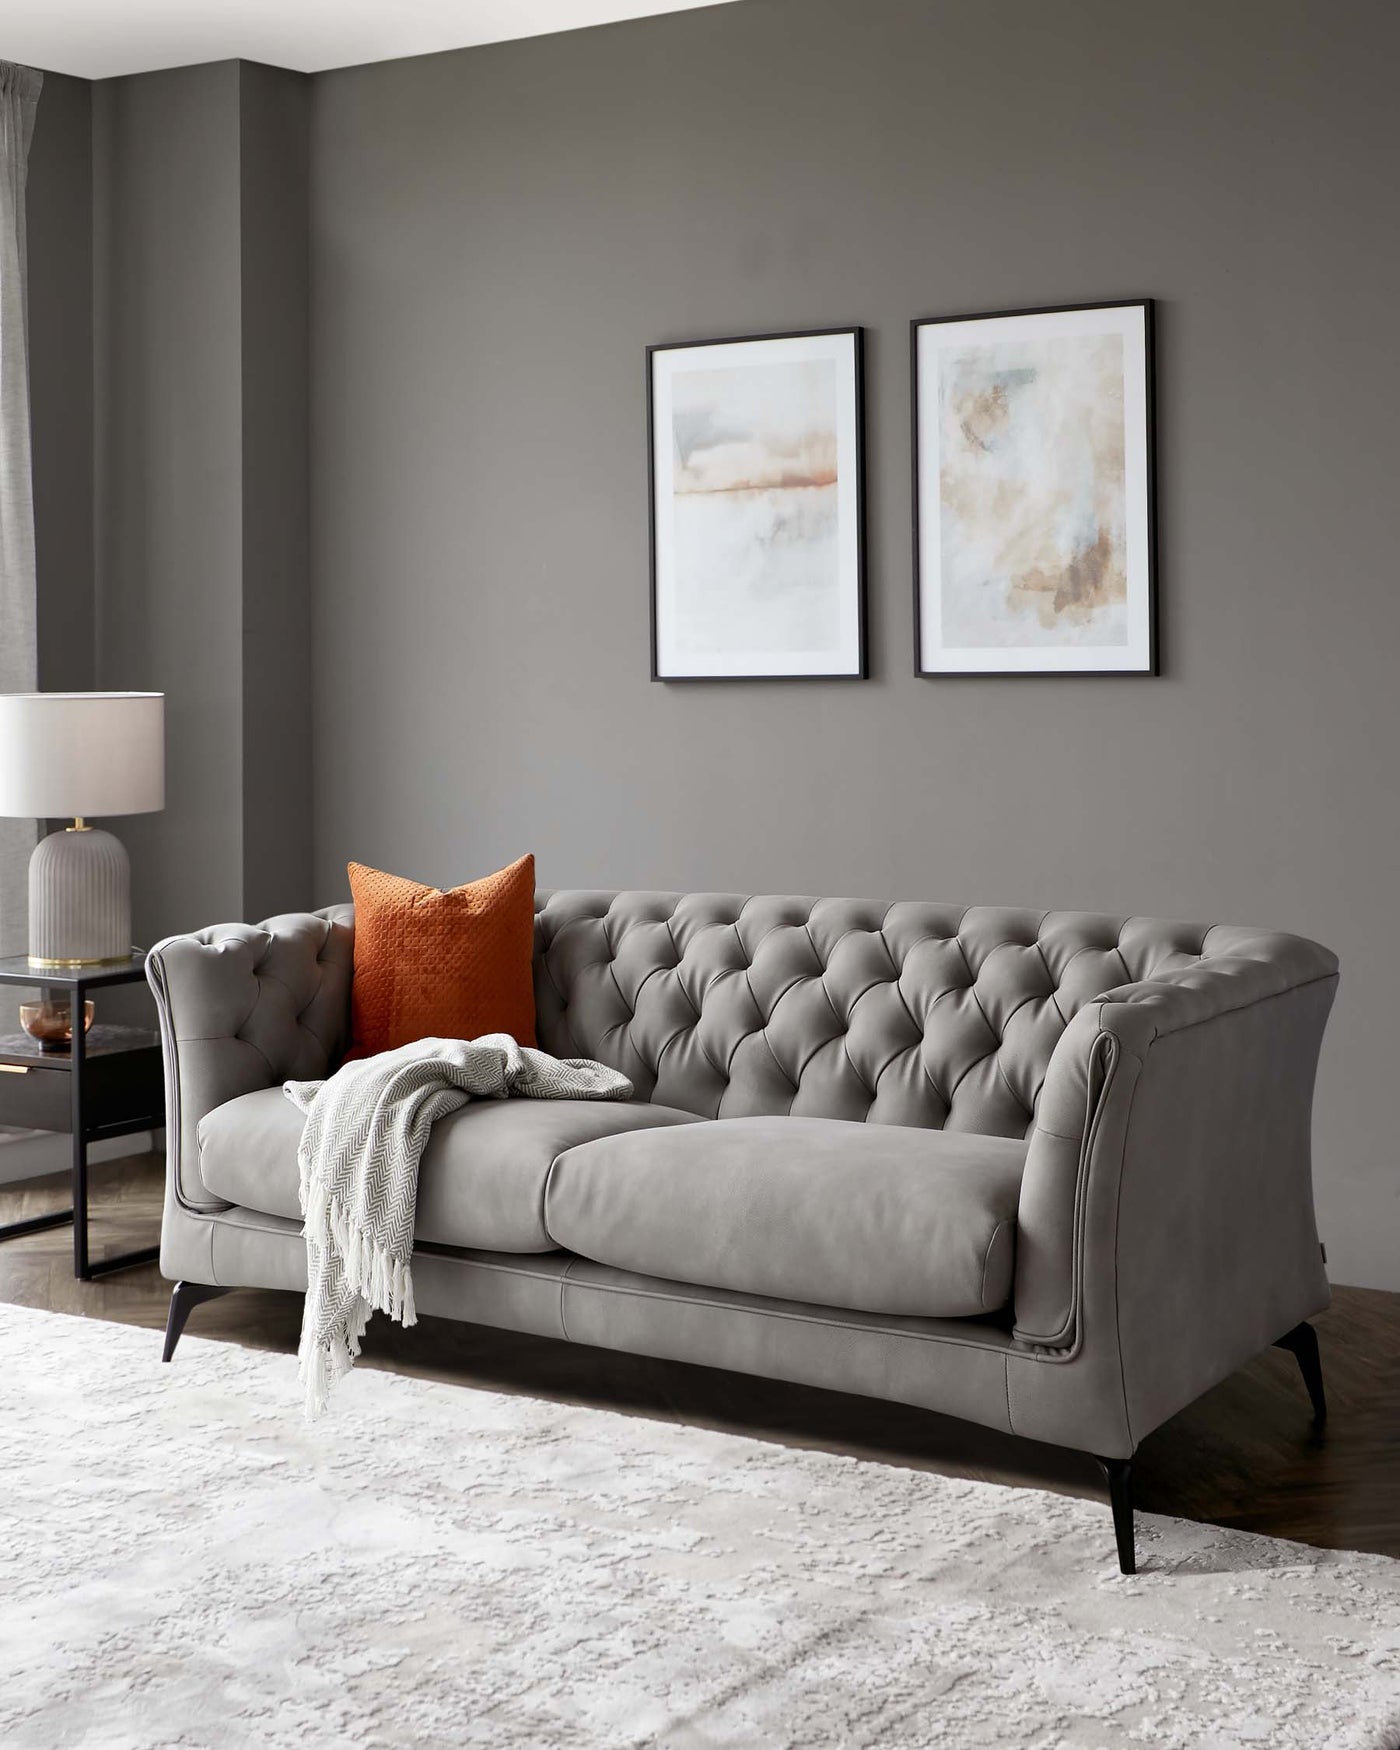 "Elegant grey tufted chesterfield sofa with rolled arms and black wooden legs, adorned with a burnt orange accent pillow and a soft grey throw blanket, on a white textured area rug."